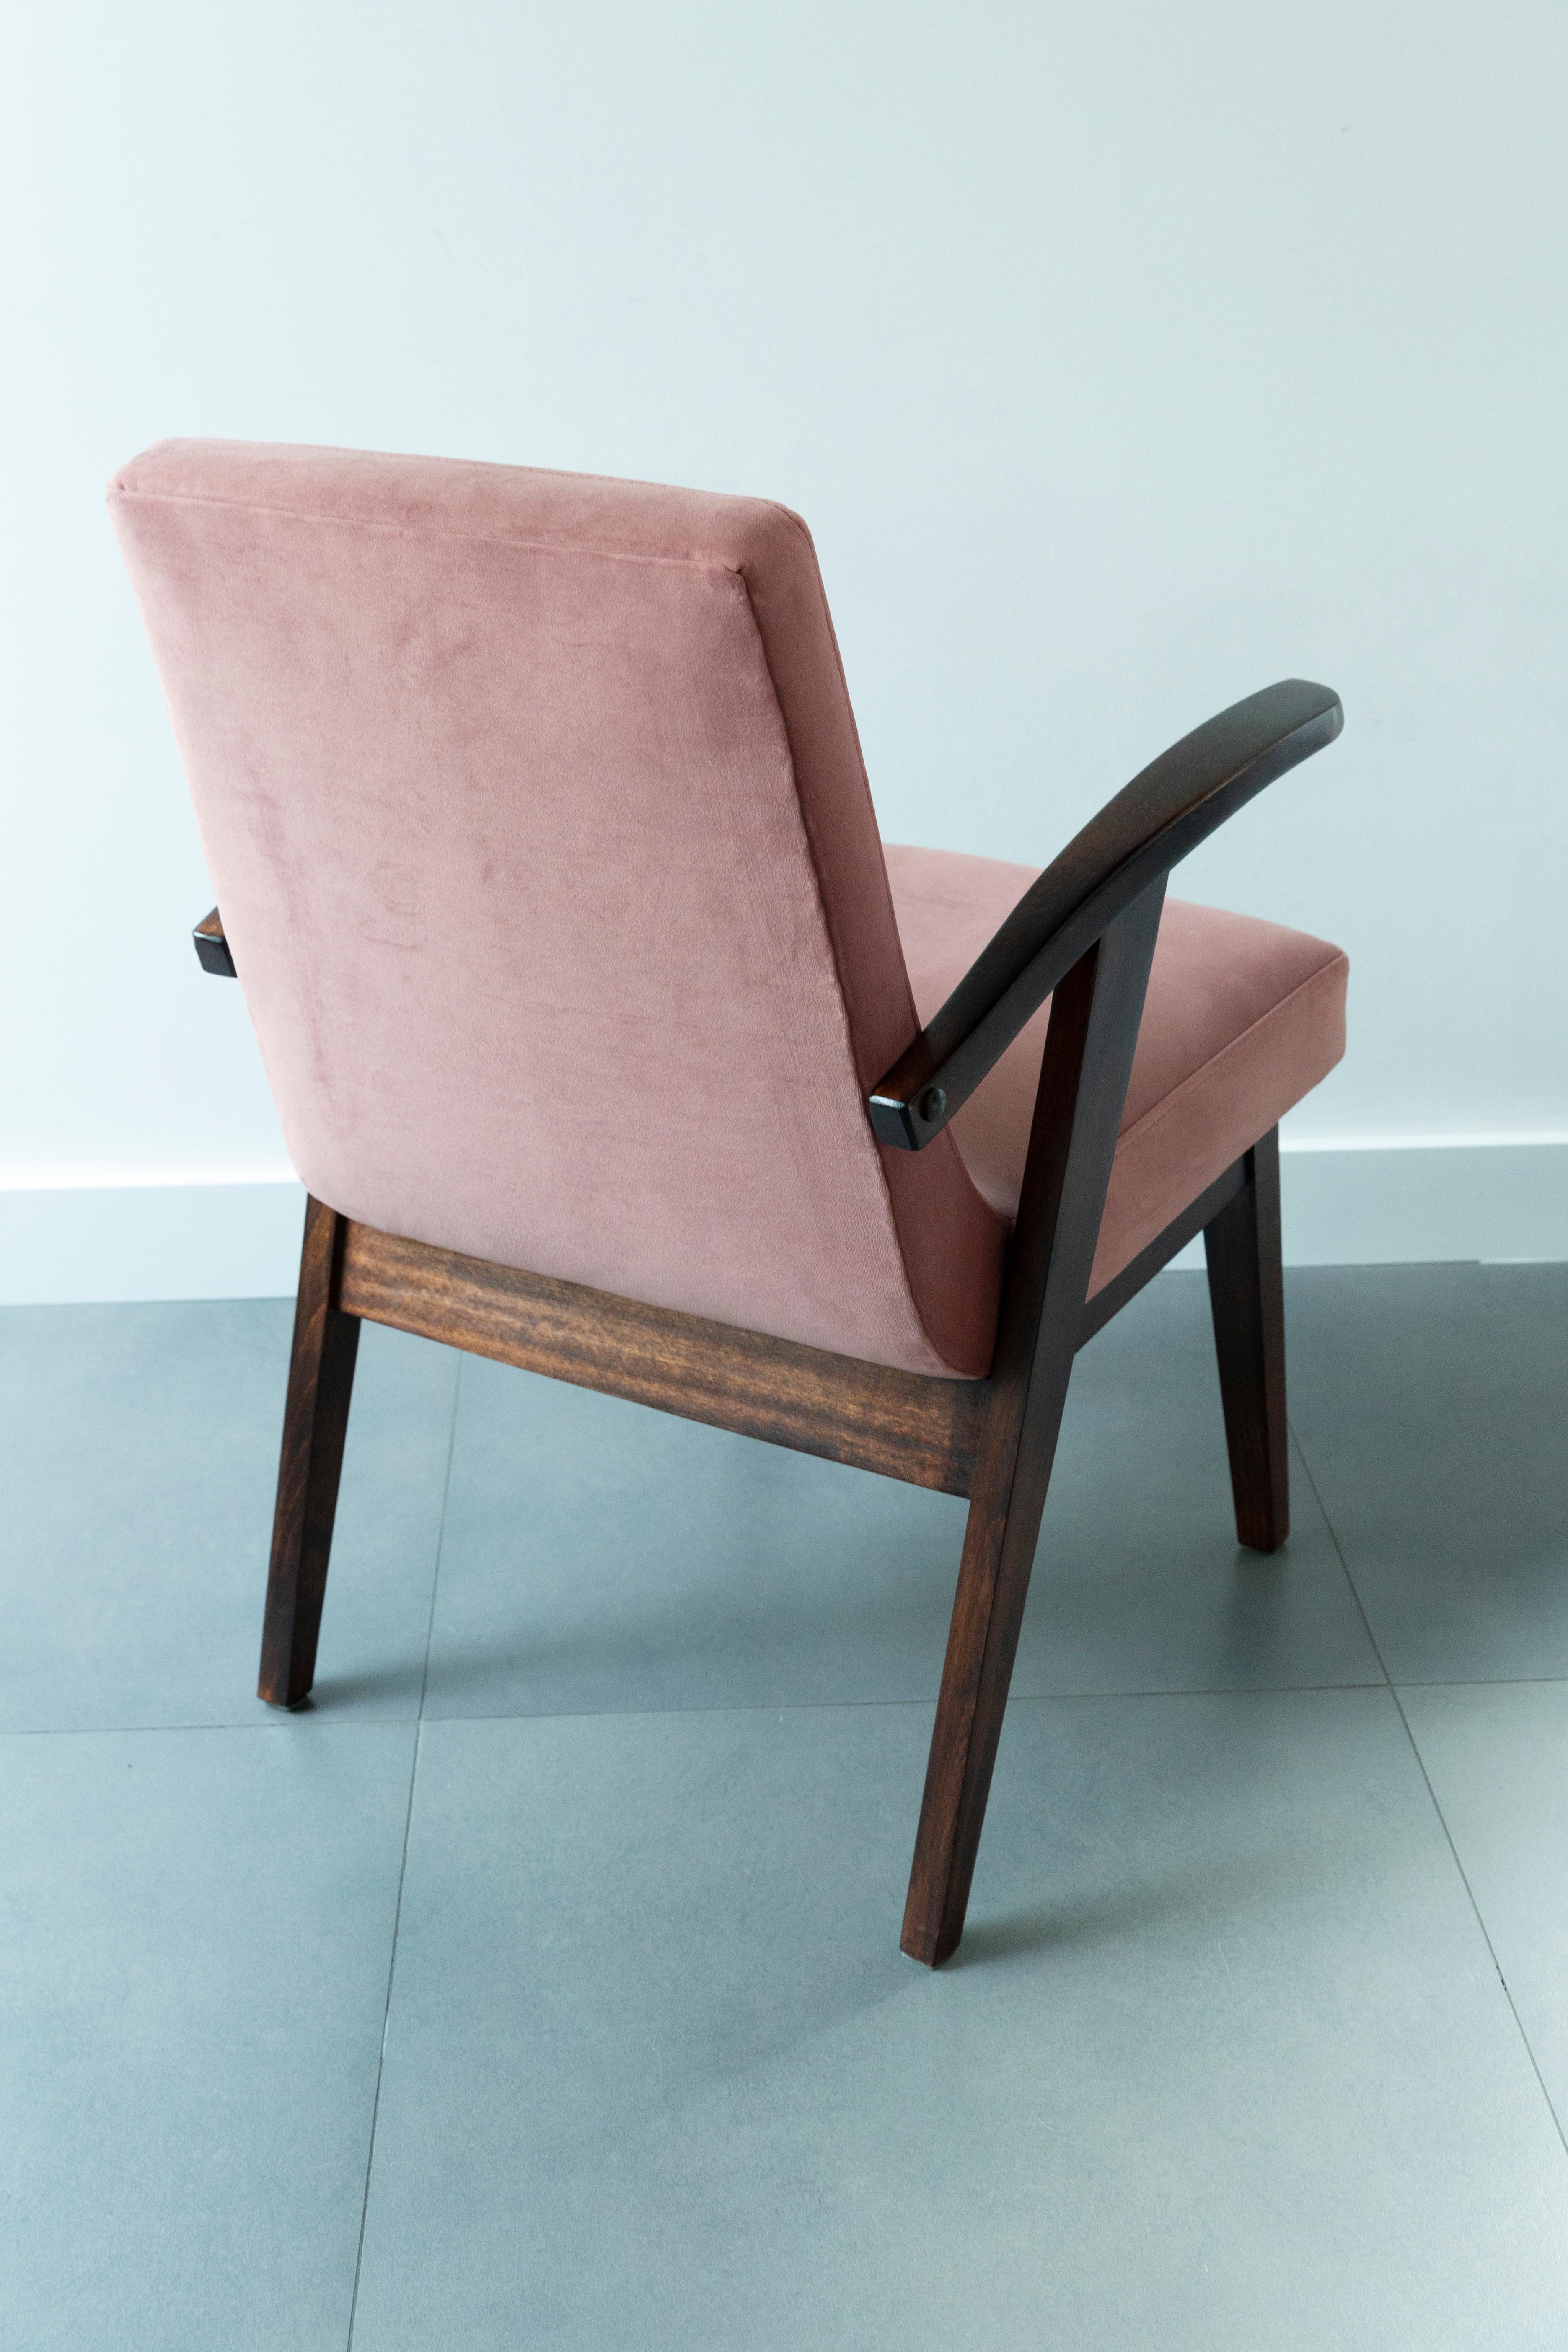 20th Century Vintage Armchair in Dusty Pink Velvet by Mieczyslaw Puchala, 1960s For Sale 5